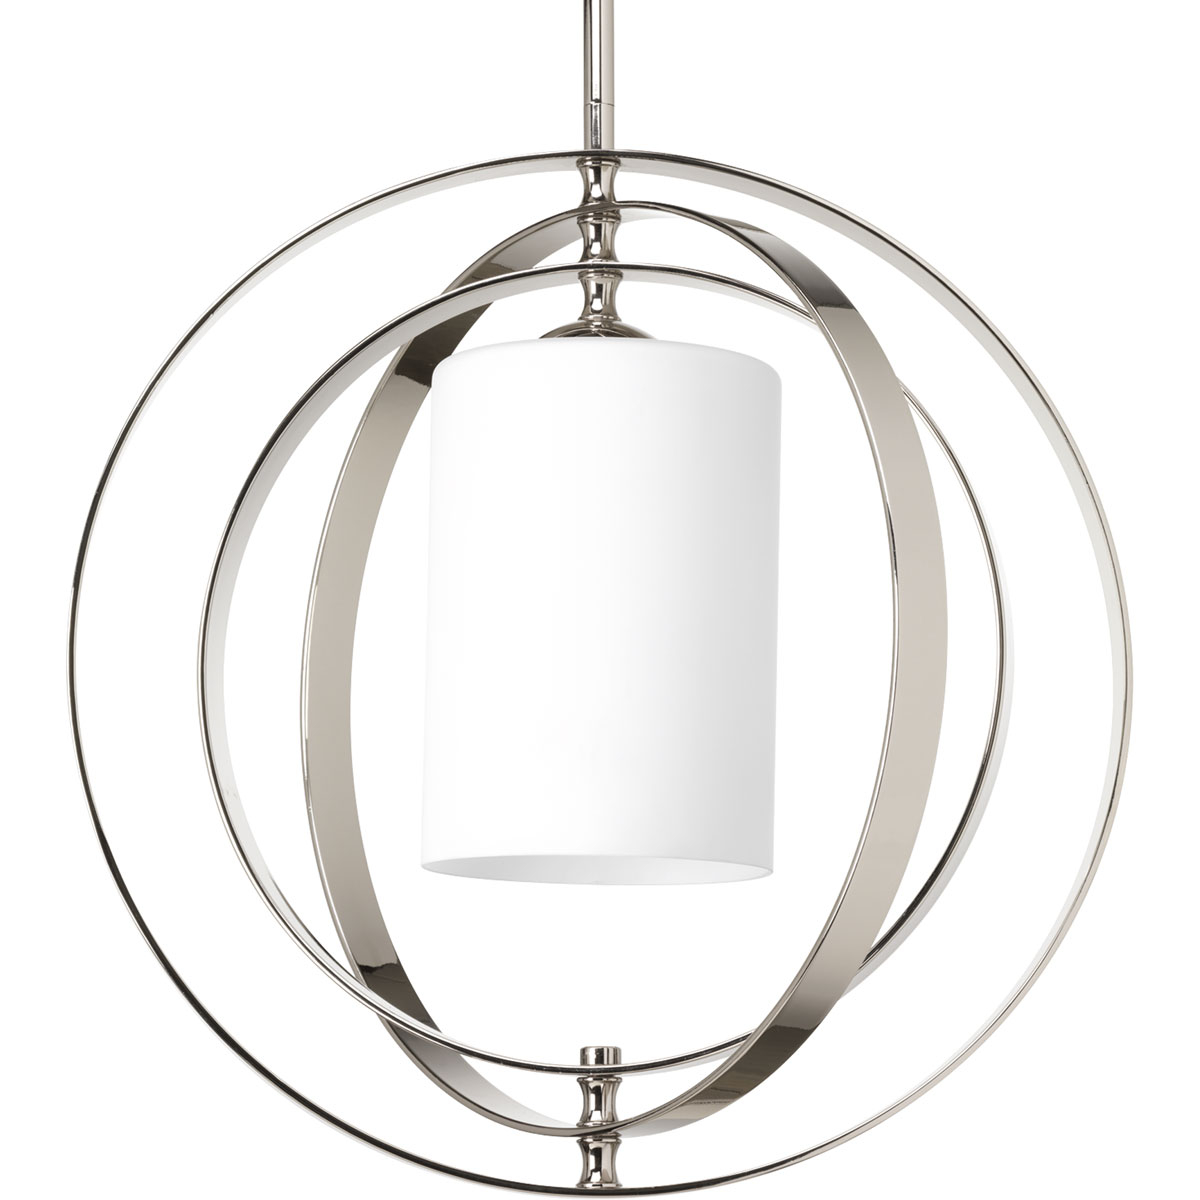 Inspired by ancient astronomy armillary spheres, the interlocking rings pivot for an infinite variety of positions. One-light pendant in Polished Nickel is ideal for installations over a farmhouse table, dining room setting or kitchen island. Can be used individually or in groupings of two or more.